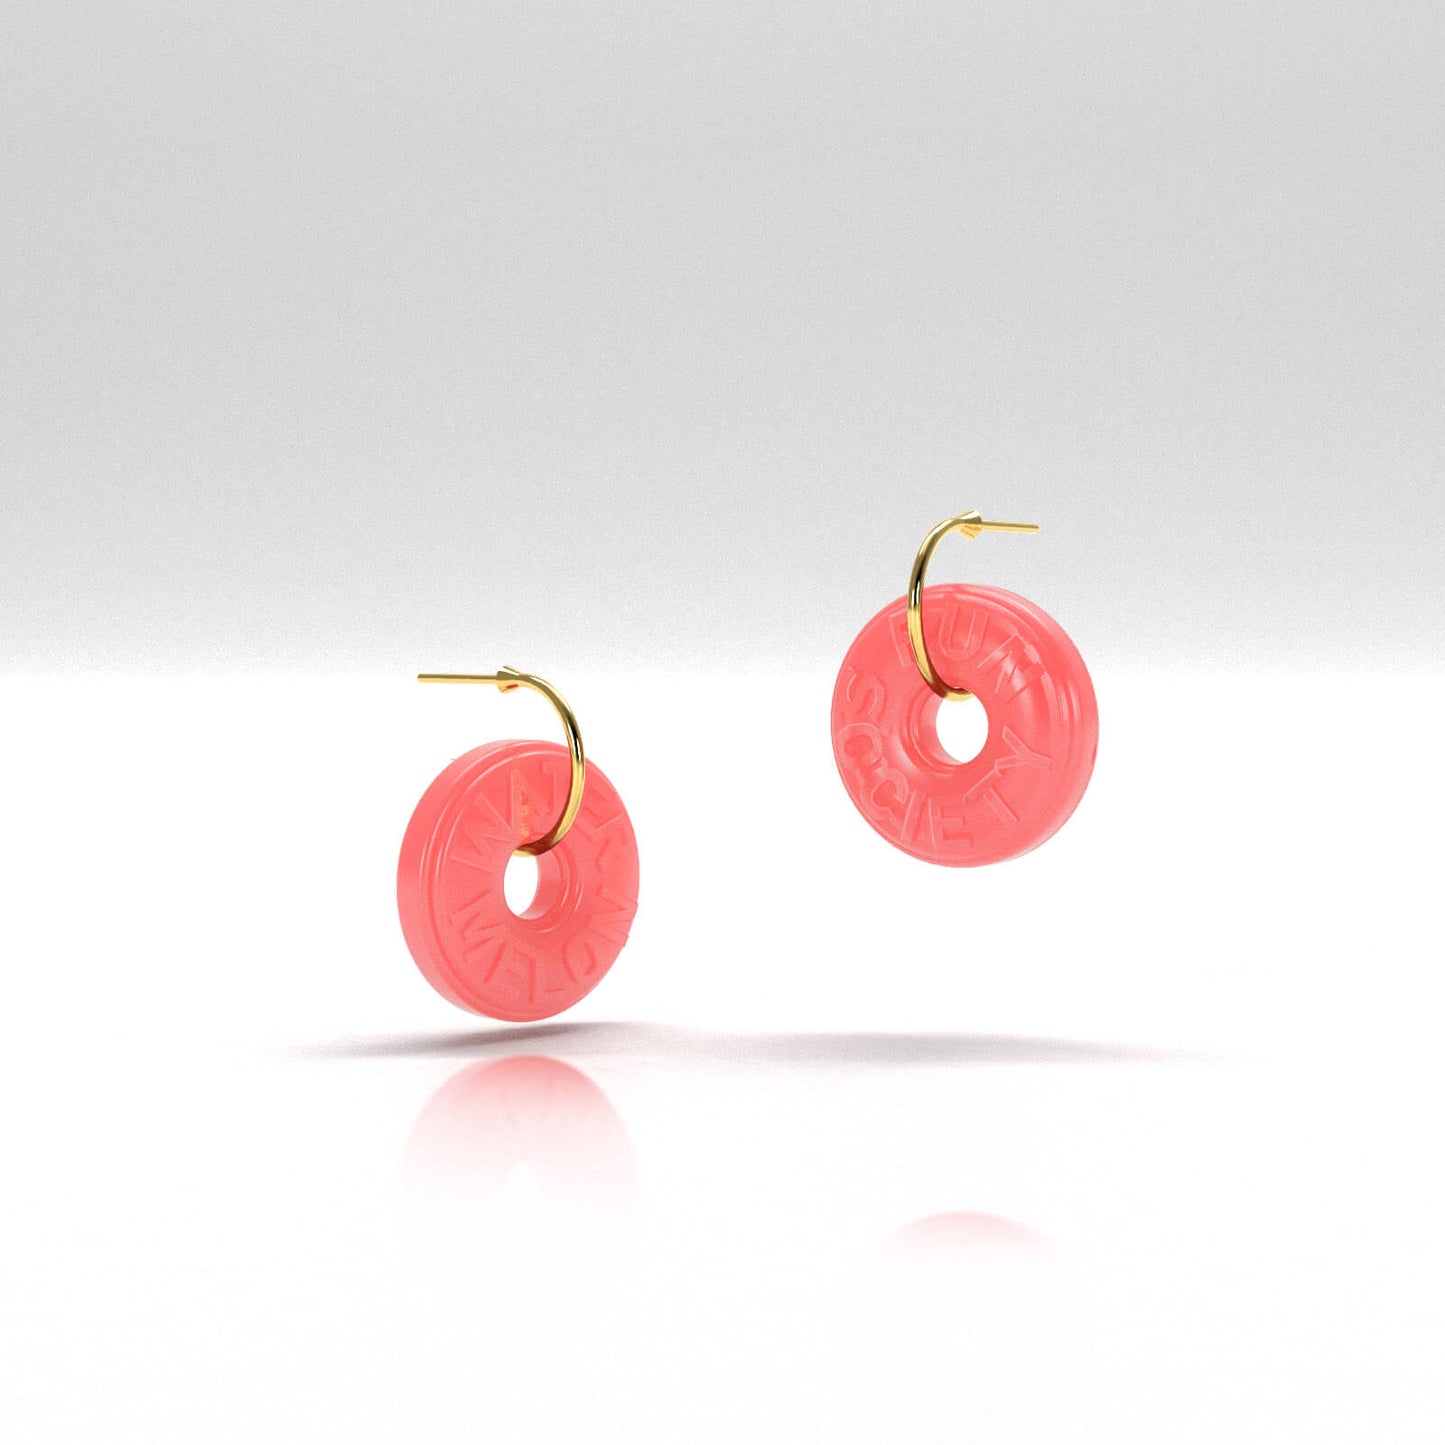 LIFE SAVERS WATERMELON earrings - The ones that weren't going out